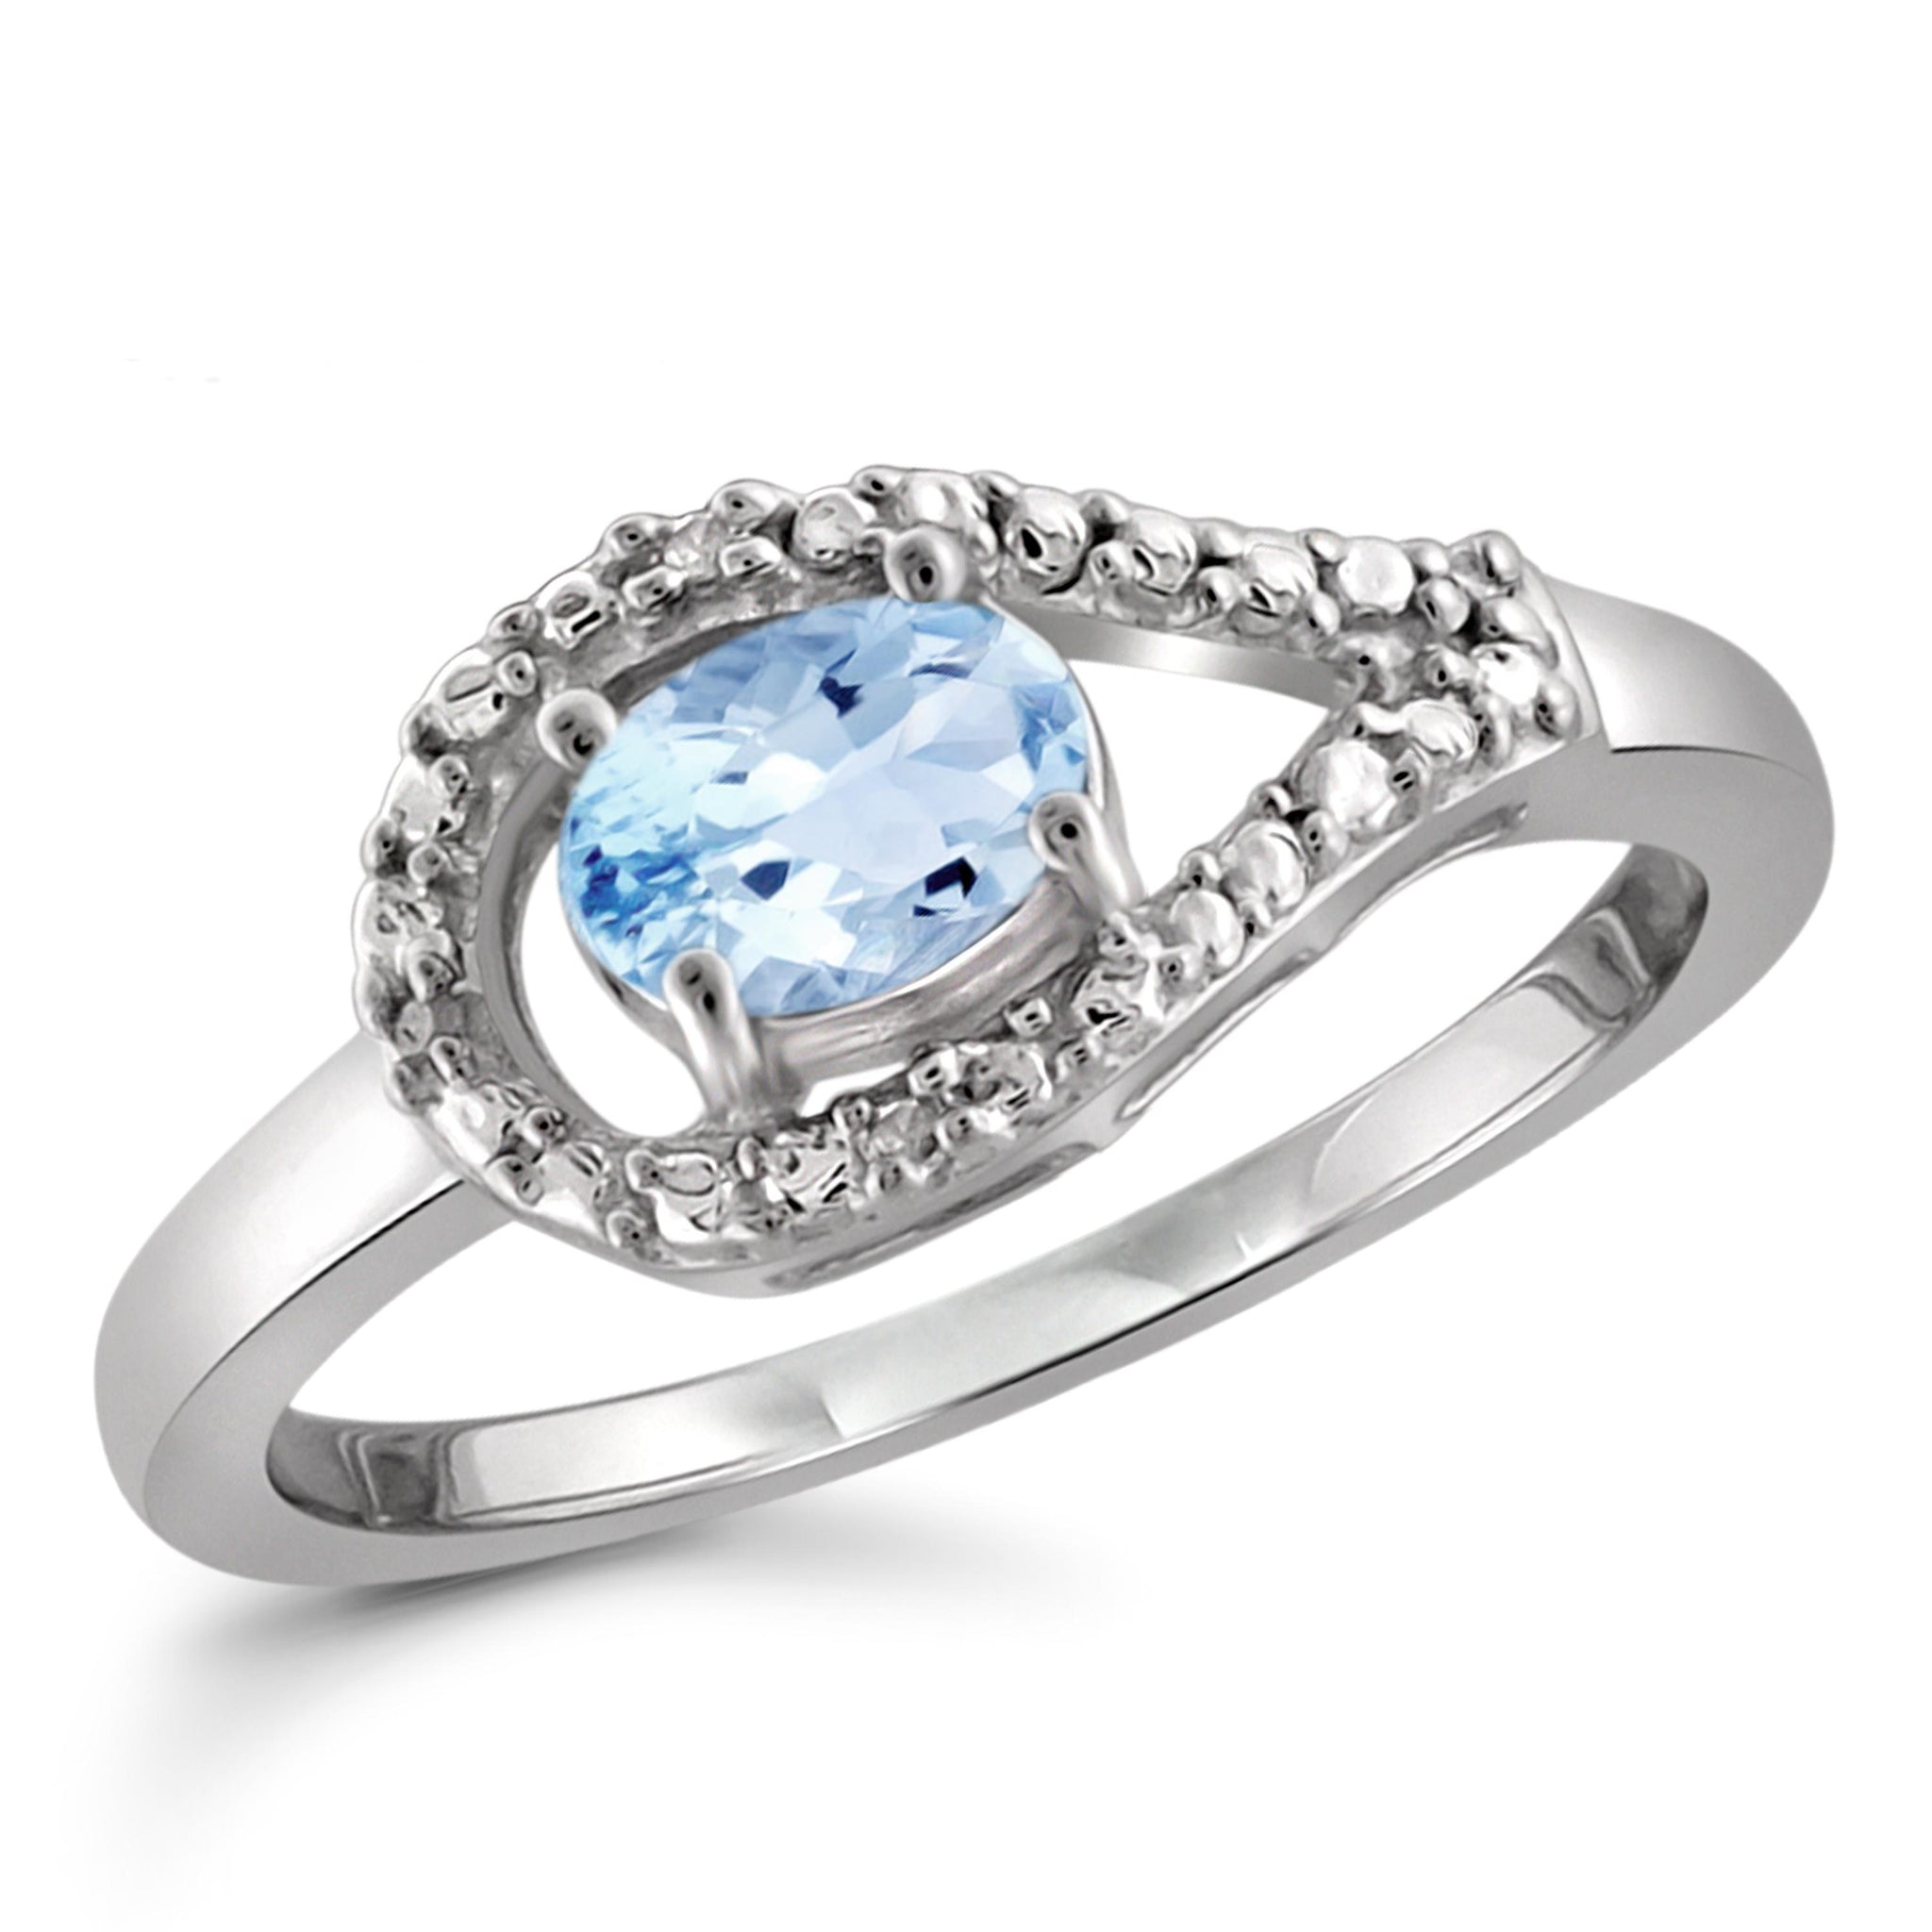 JewelonFire 1/2 Carat T.G.W. Sky Blue Topaz And White Diamond Accent Sterling Silver Ring - Assorted Colors